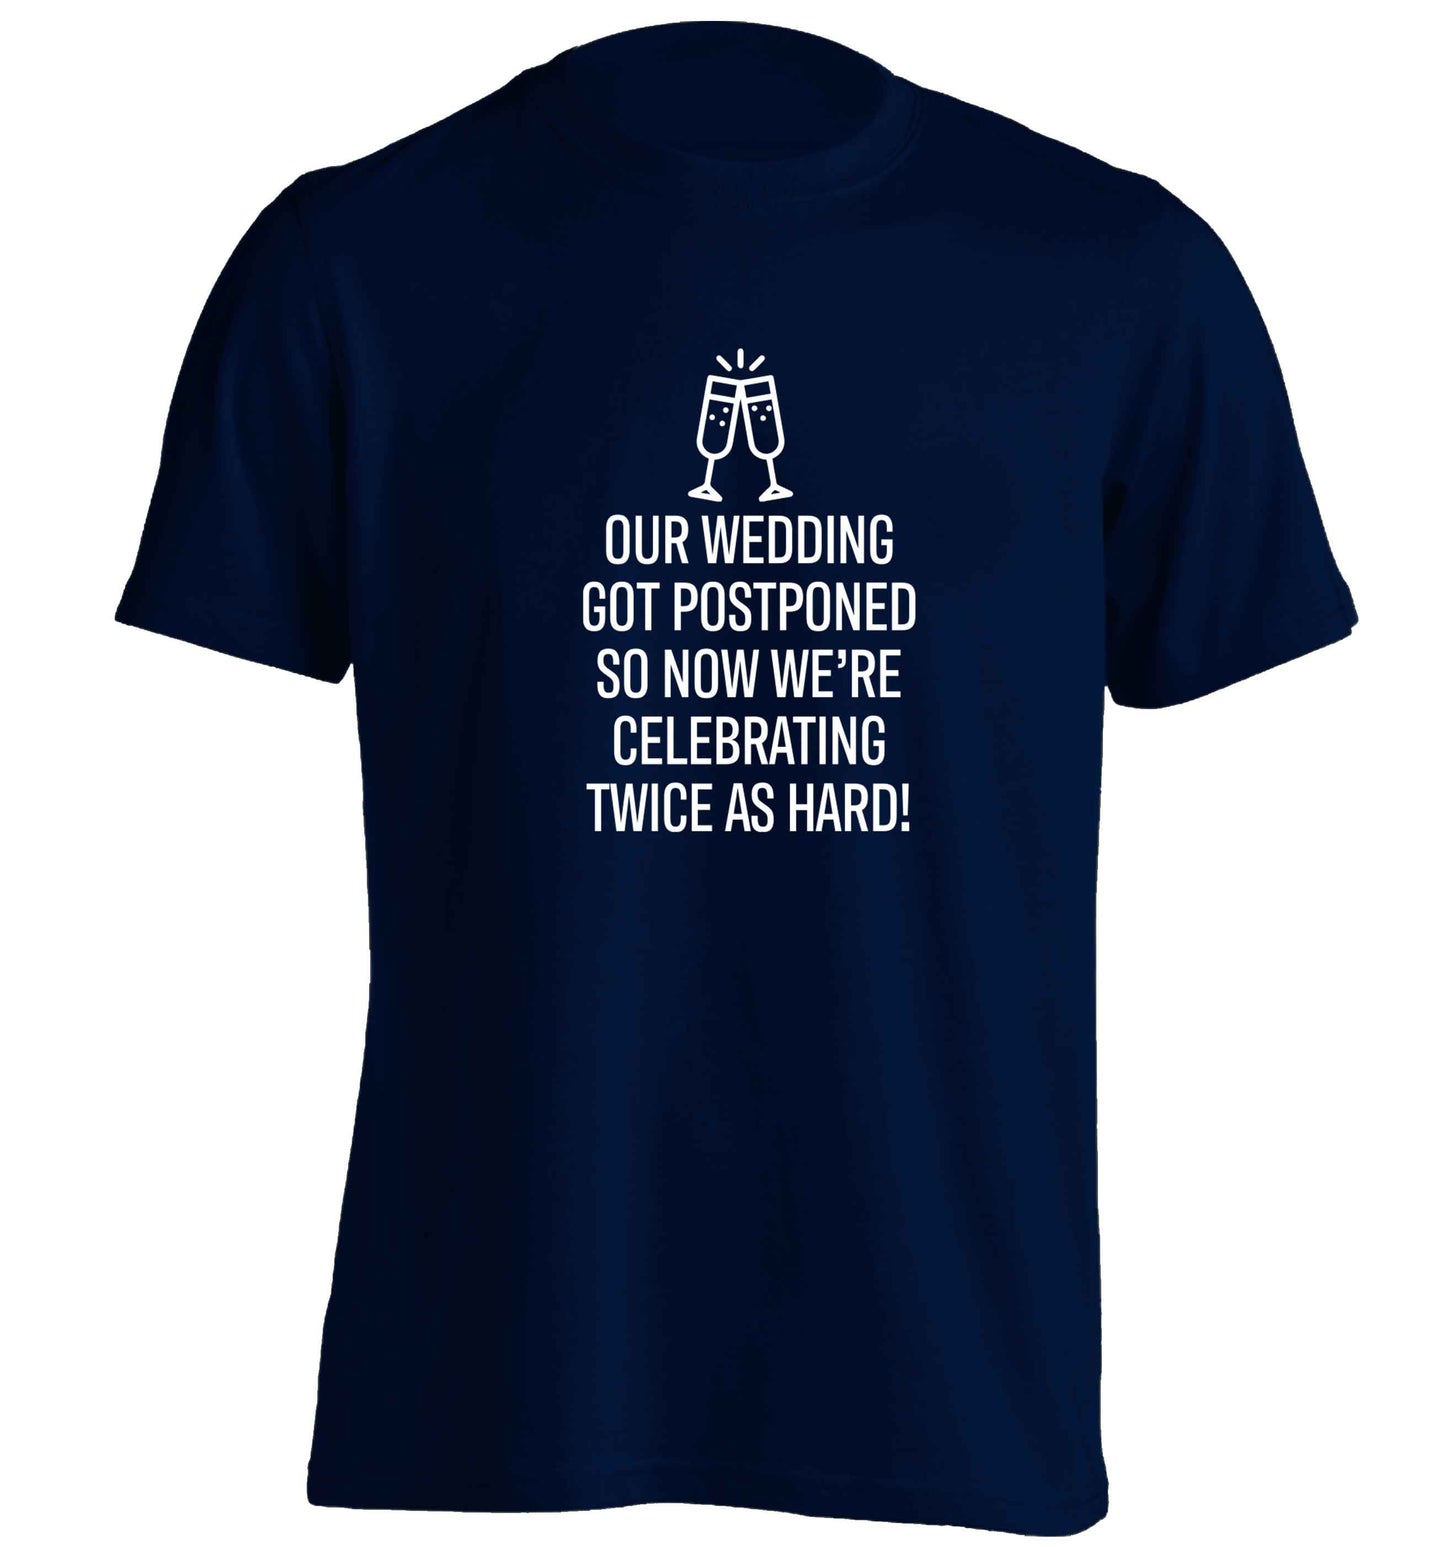 Postponed wedding? Sounds like an excuse to party twice as hard!  adults unisex navy Tshirt 2XL